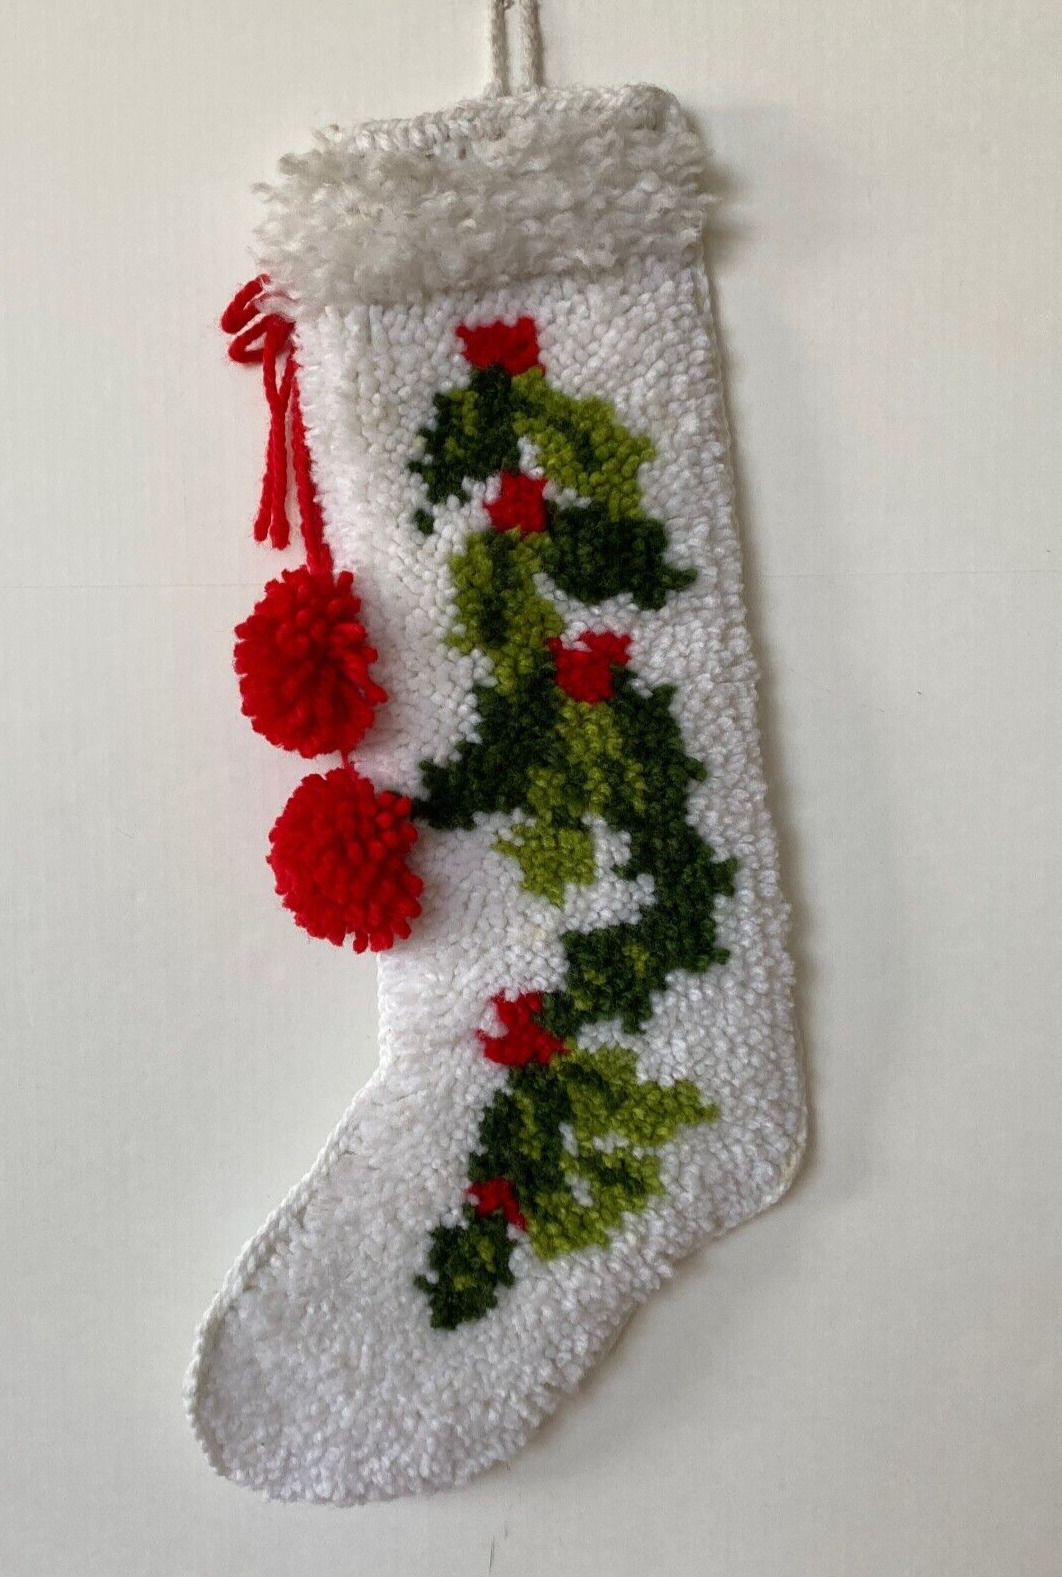 Vintage Latch Hook Completed Mistletoe Christmas Stocking Wall Hanging Large 26”